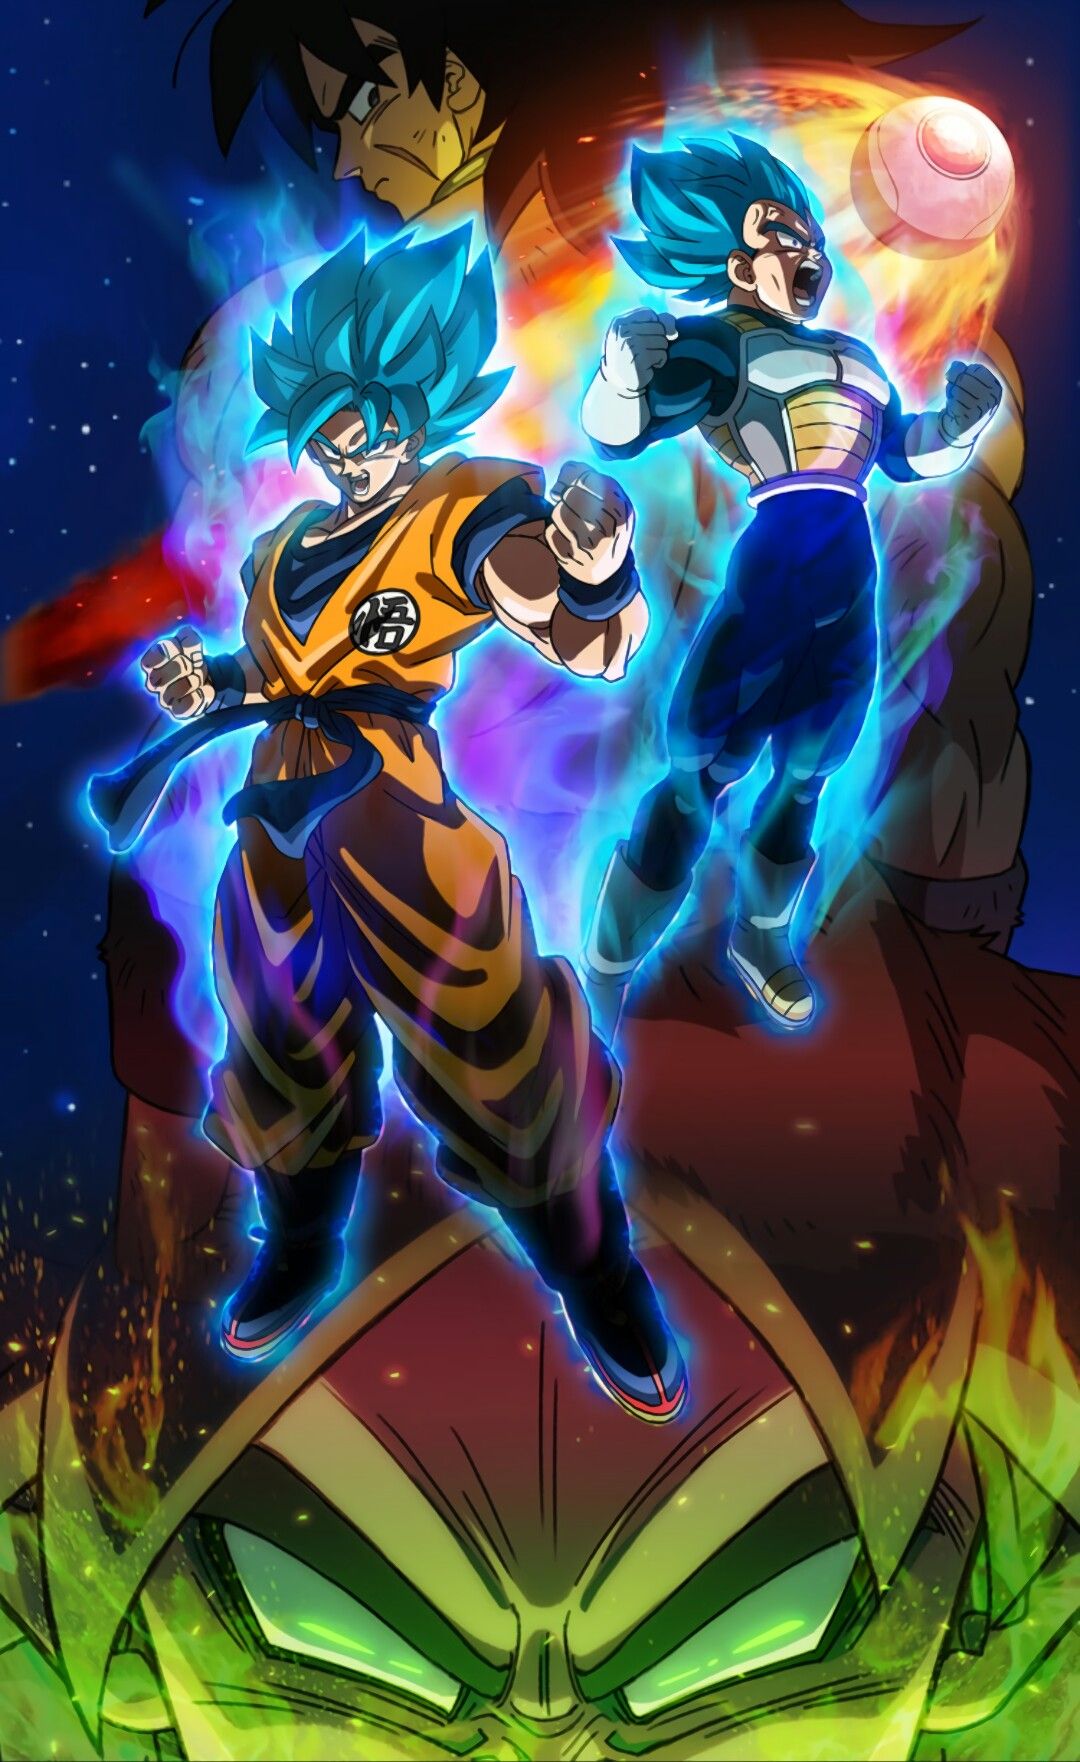 Dragon Ball Poster Gogeta Blue vs Full power Broly 12in x18in Free Shipping